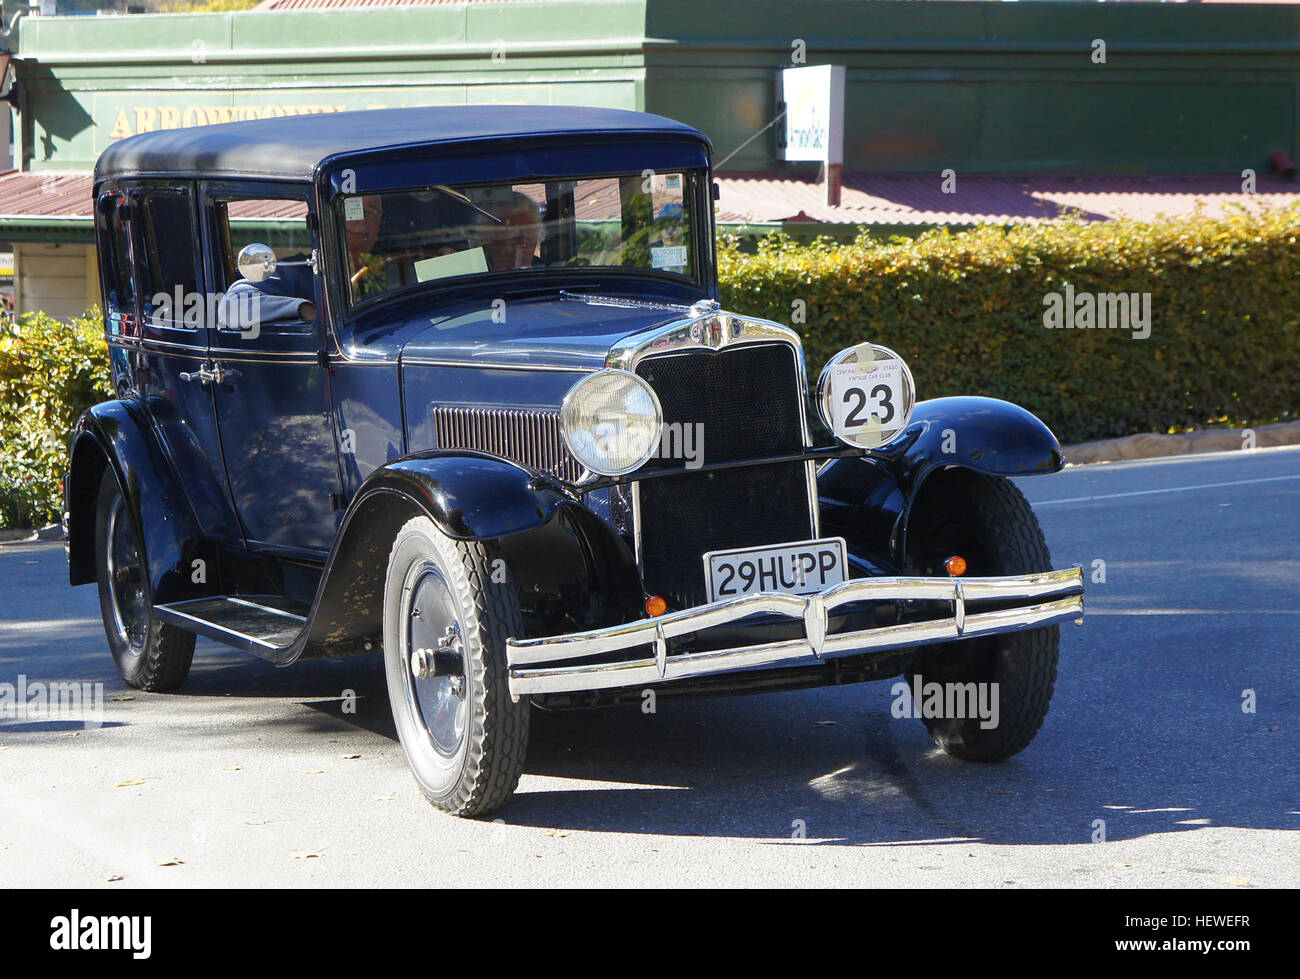 This 1929 Hupmobile Century Six Sedan wears coachwork by Murray. It is powered by a 212 cubic-inch L-head six-cylinder engine fitted with a single Stromberg carburetor and produces 57 horsepower. There is a three-speed manual gearbox and four-wheel mechanical drum brakes. Stock Photo